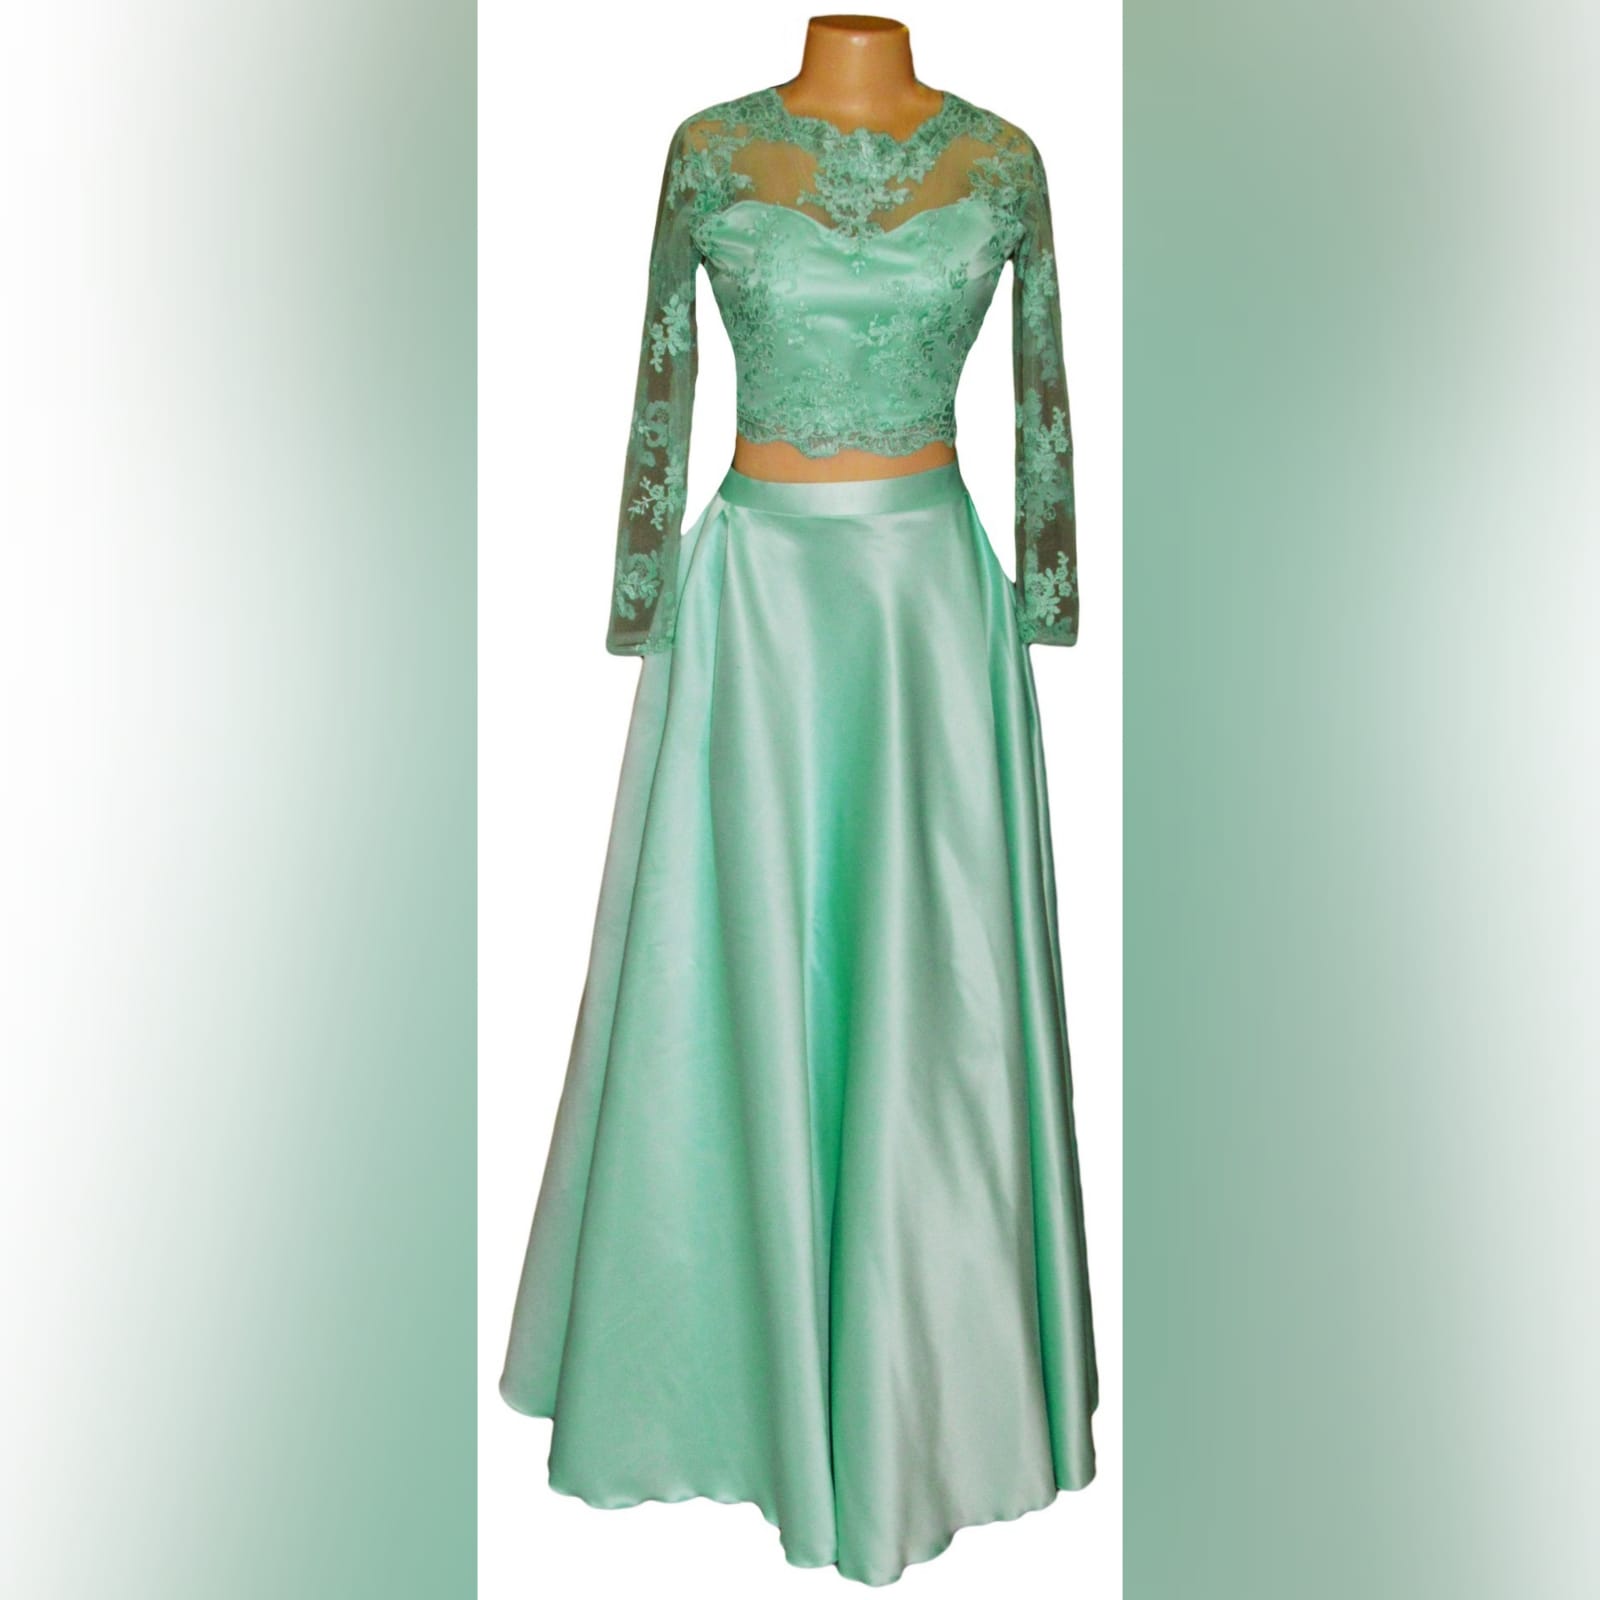 2 piece baby green prom dance dress lace crop top 3 2 piece baby green prom dress lace crop top with a diamond open back and long sleeves. With a long skirt.